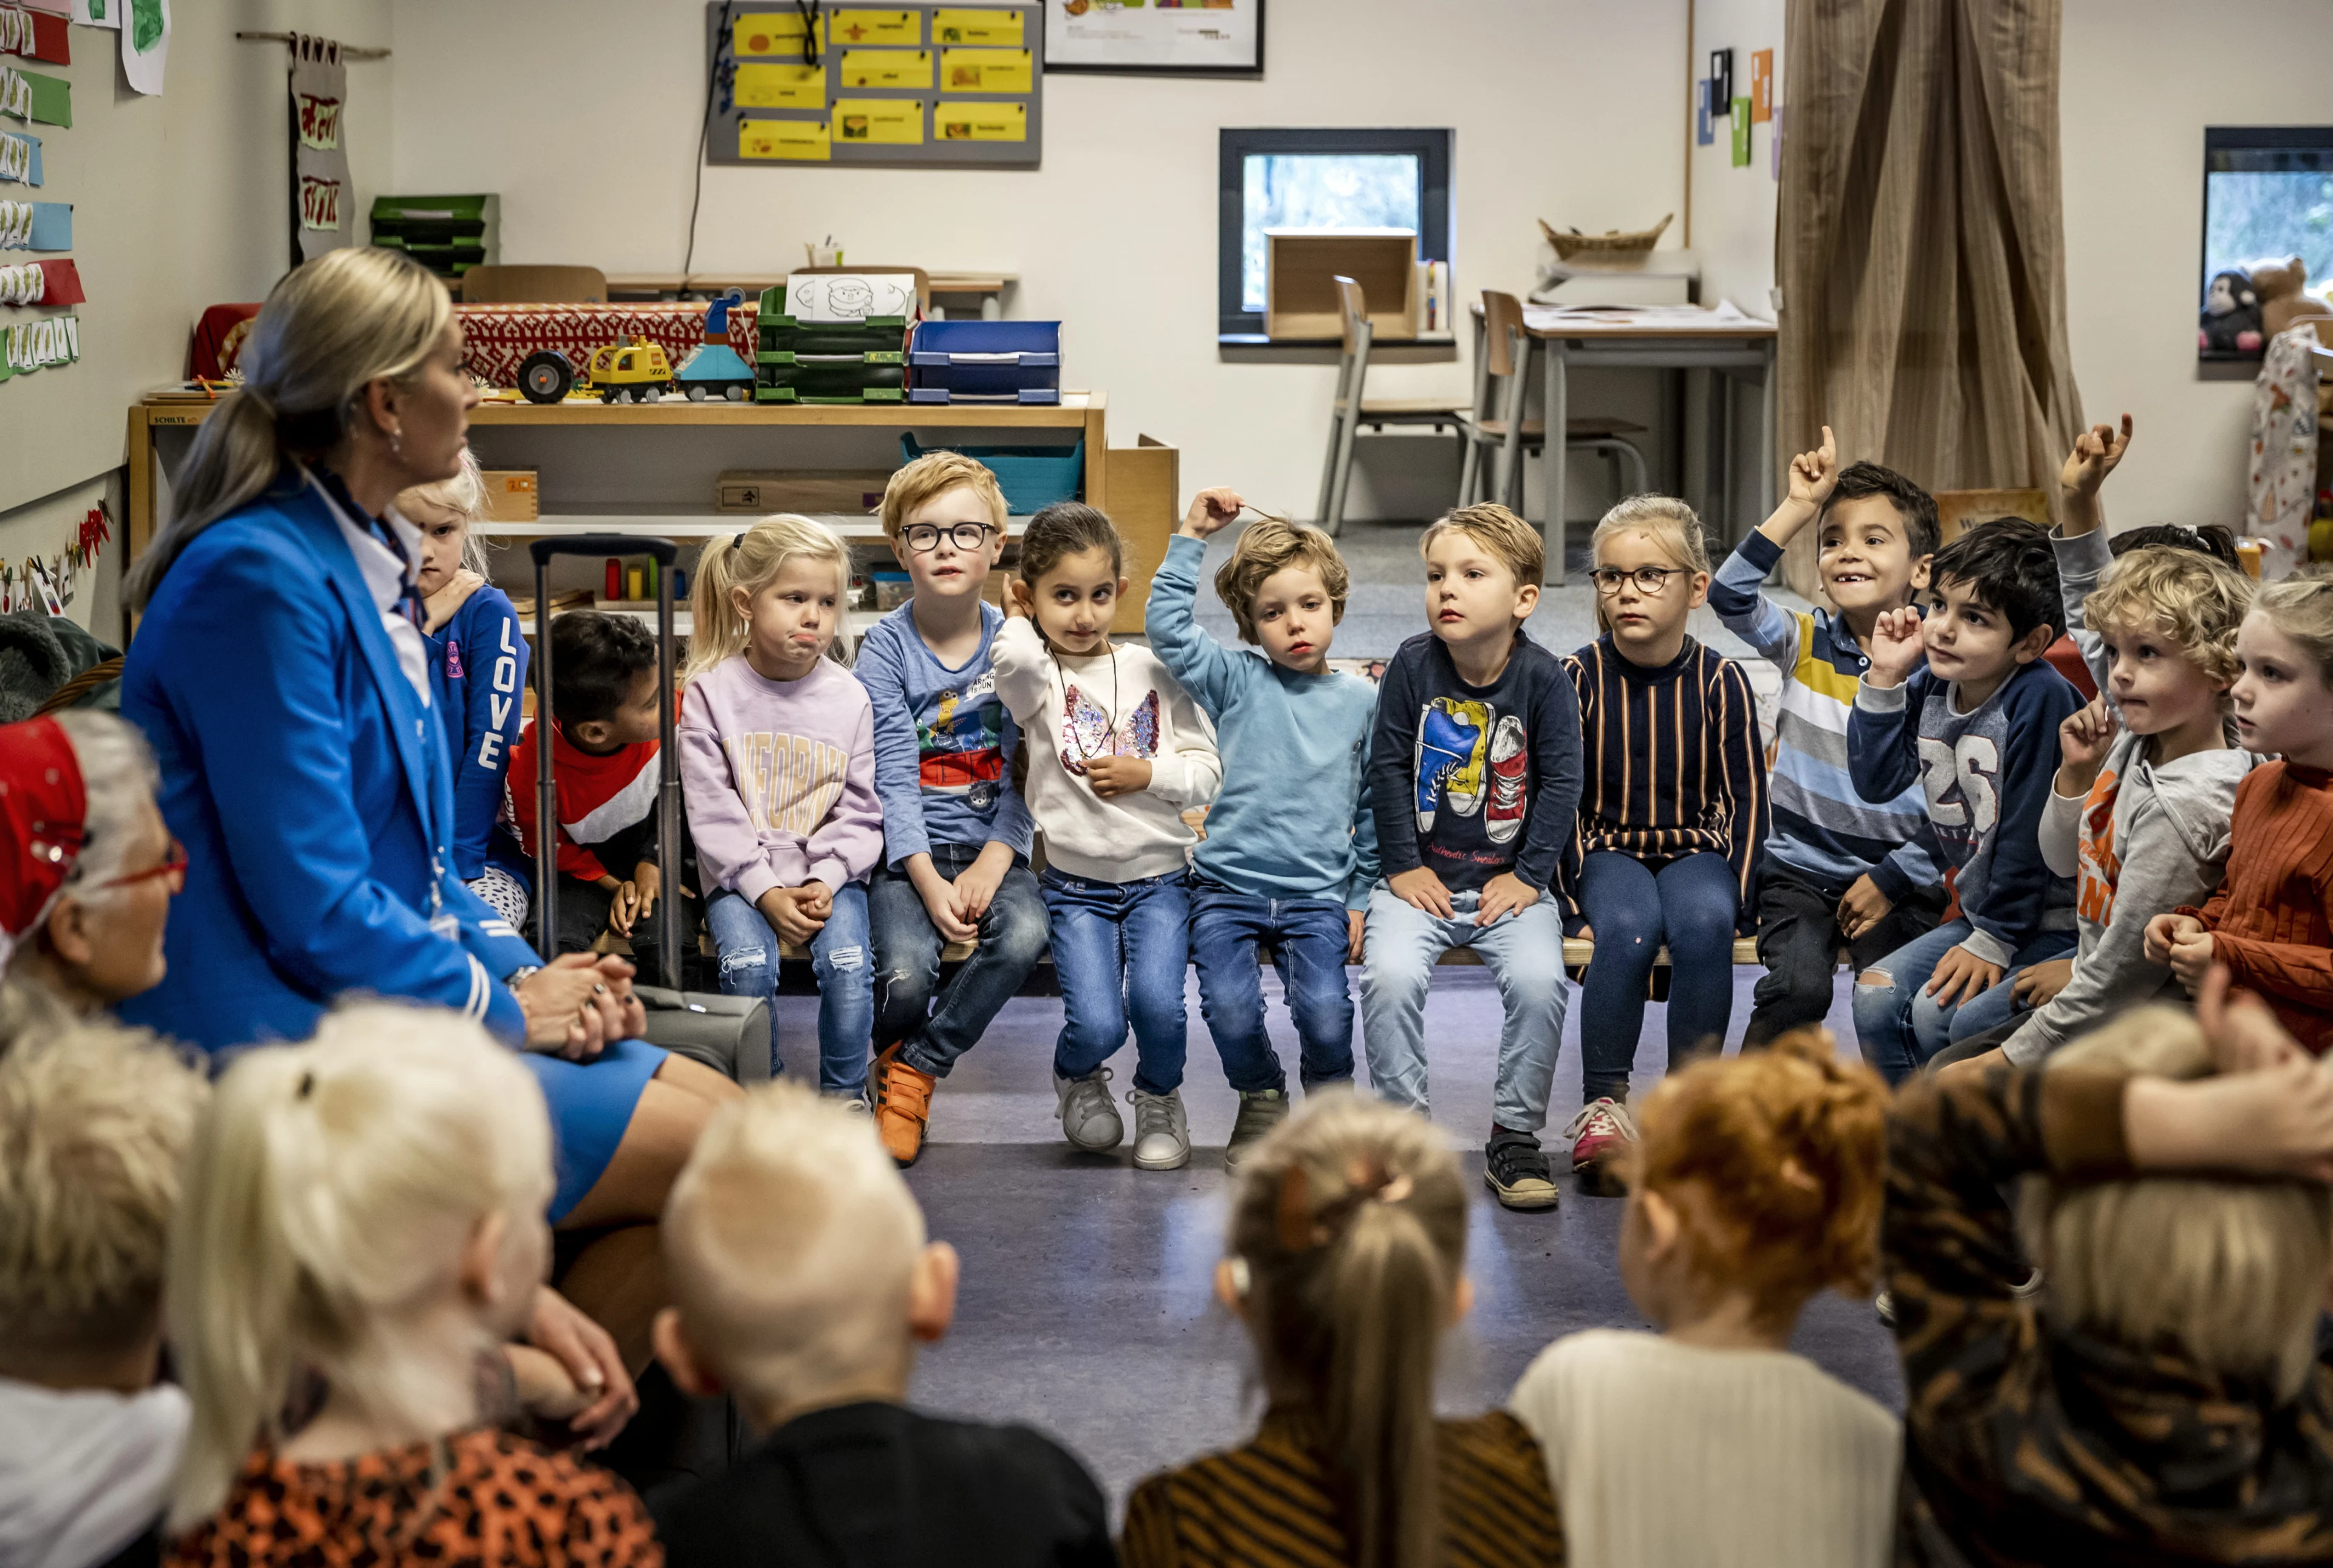 Children sitting in a circle in the classroom